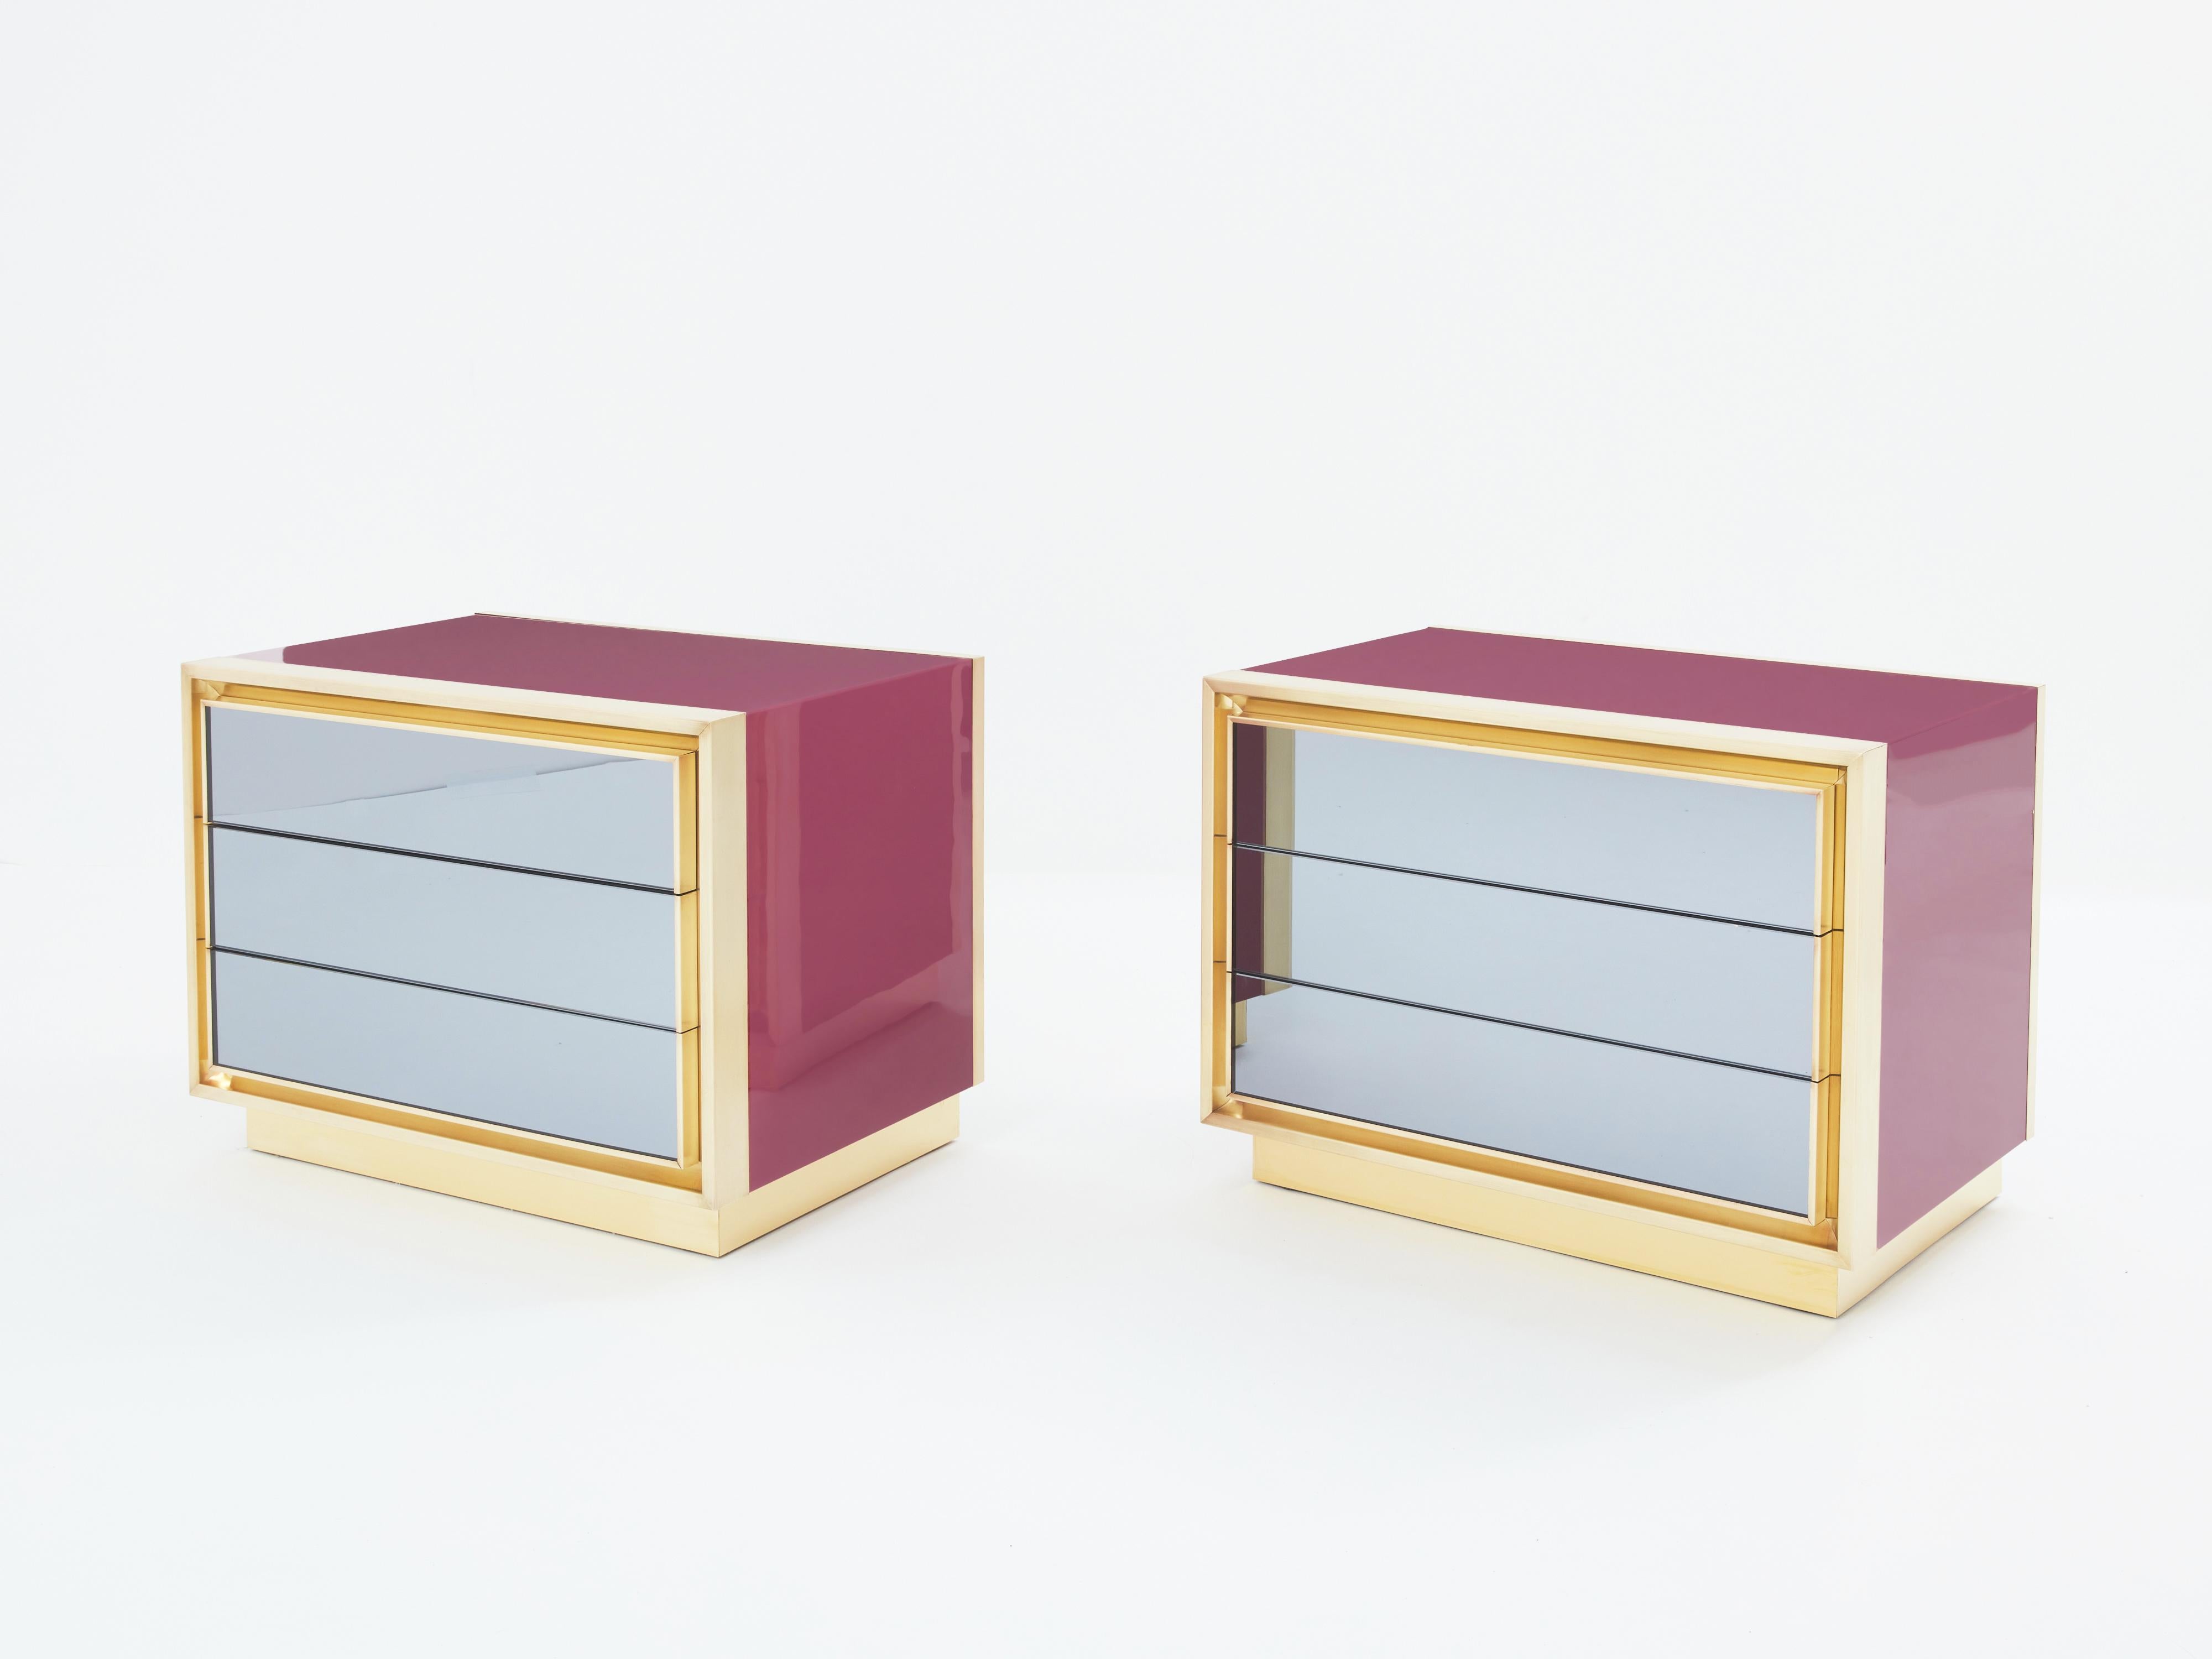 This rare pair of Maison Jasen three drawers, raspberry lacquered nightstands would be stunning in any bedroom. Made to order by Maison Jansen in France in the late 1970s, the shiny raspberry lacquer paired with brushed brass frames all around the